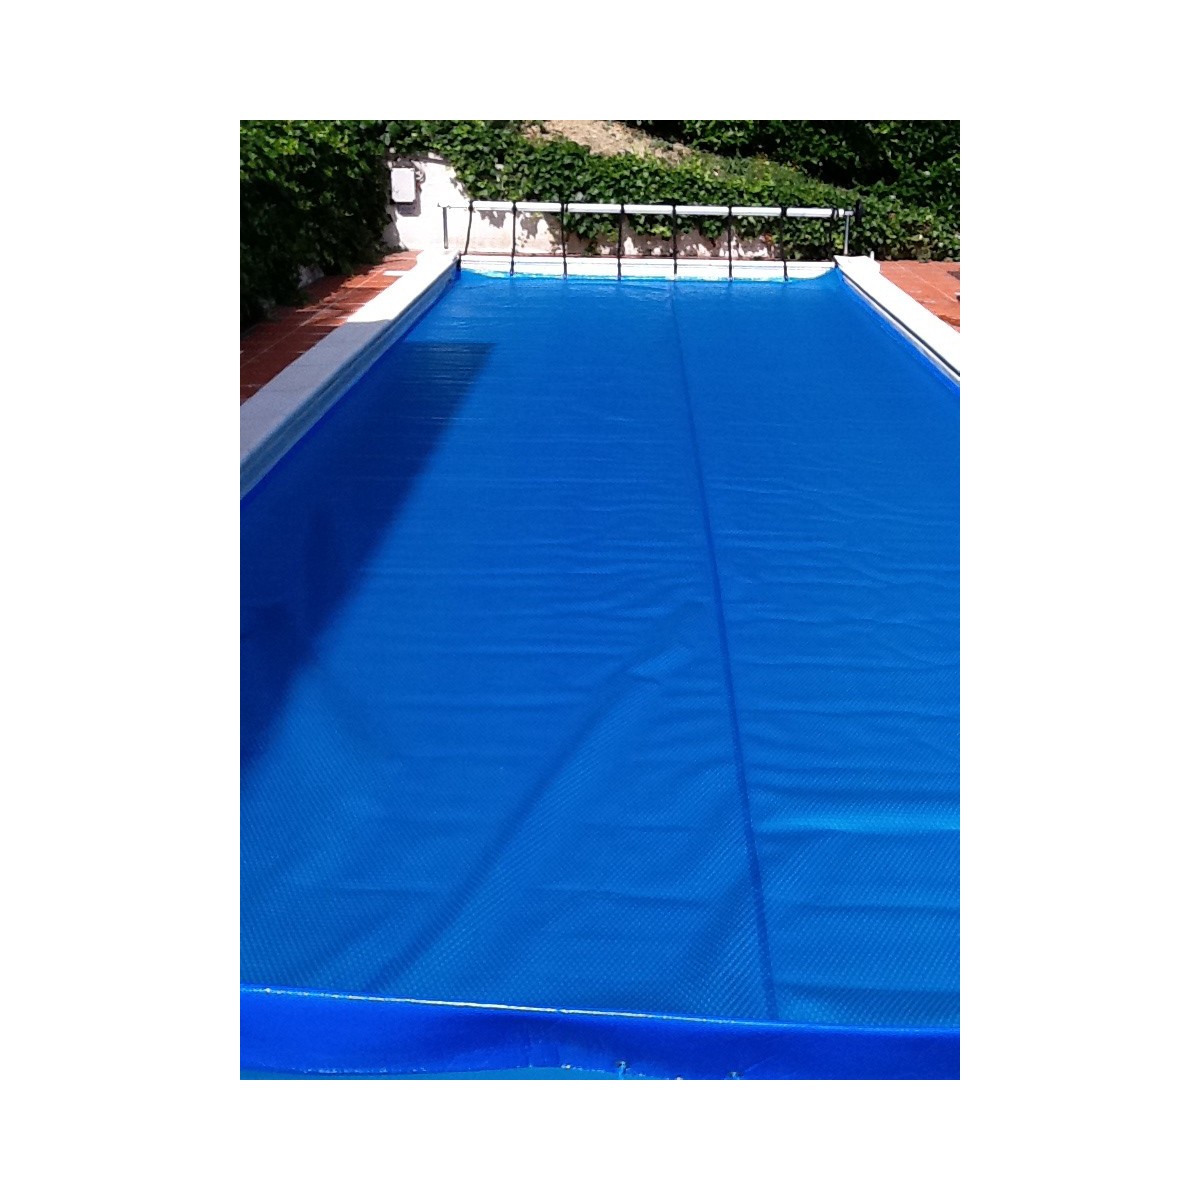 Summer thermal cover - size 4x8